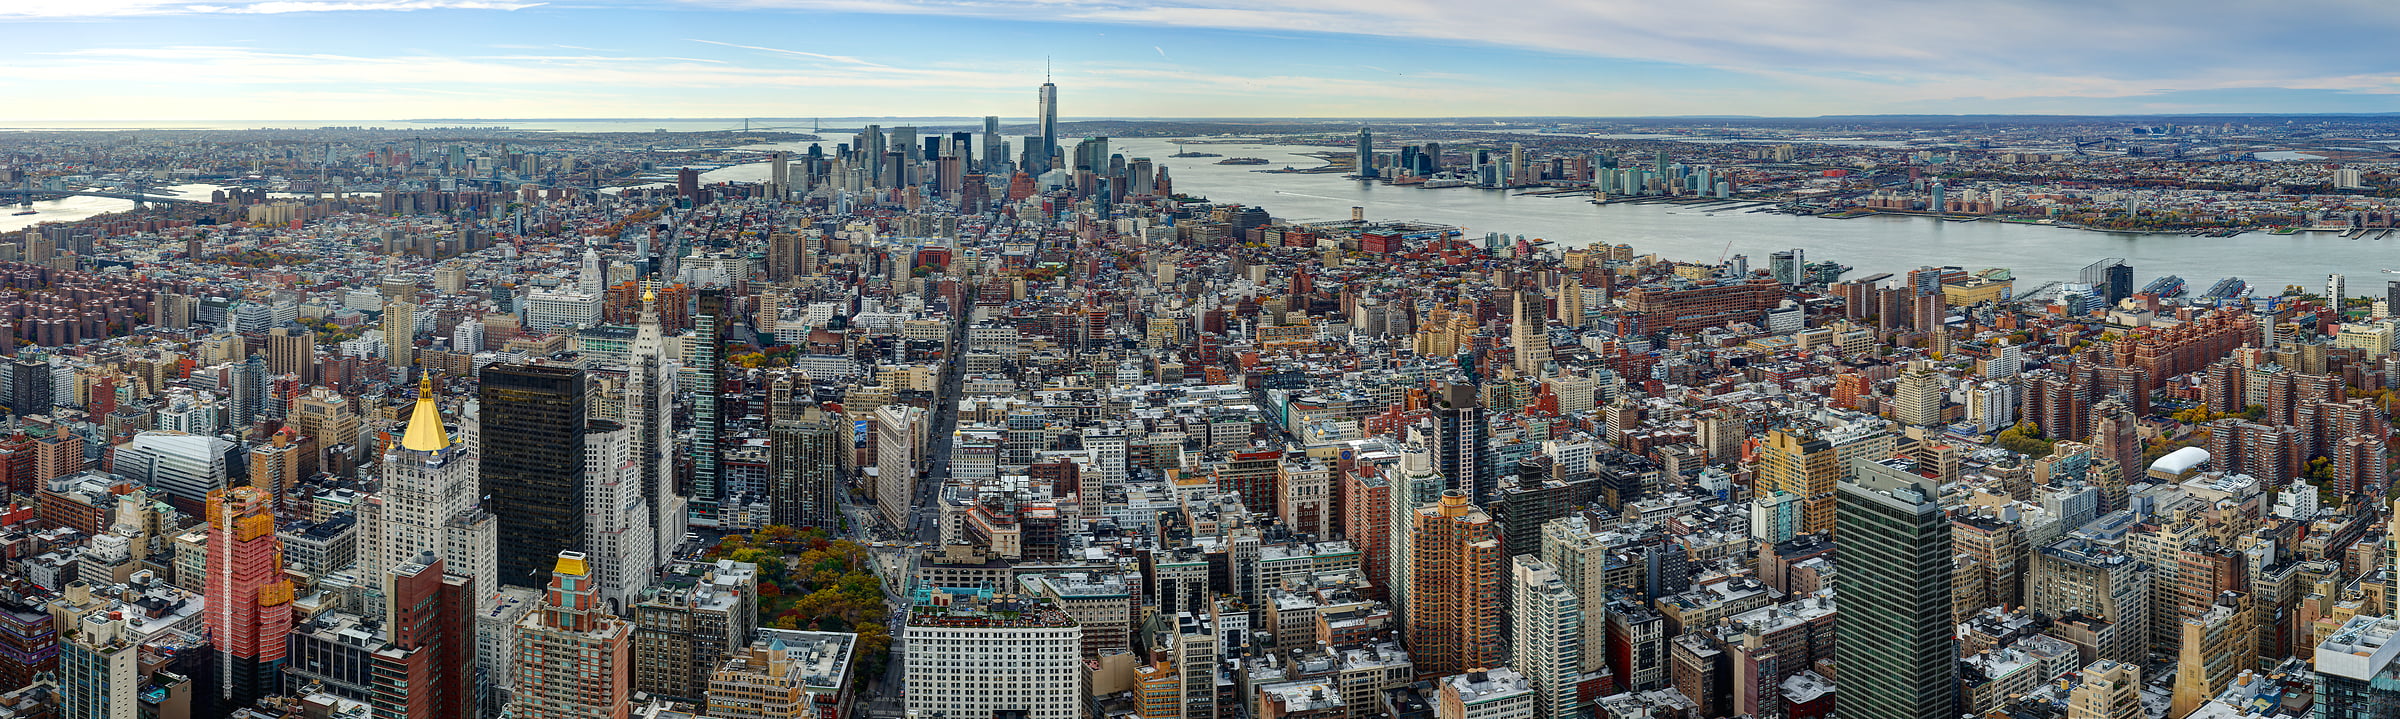 416 megapixels! A very high resolution, large-format VAST photo print of Manhattan; aerial photograph created by Tim Lo Monaco at the Empire State Building in Manhattan, New York City, New York.